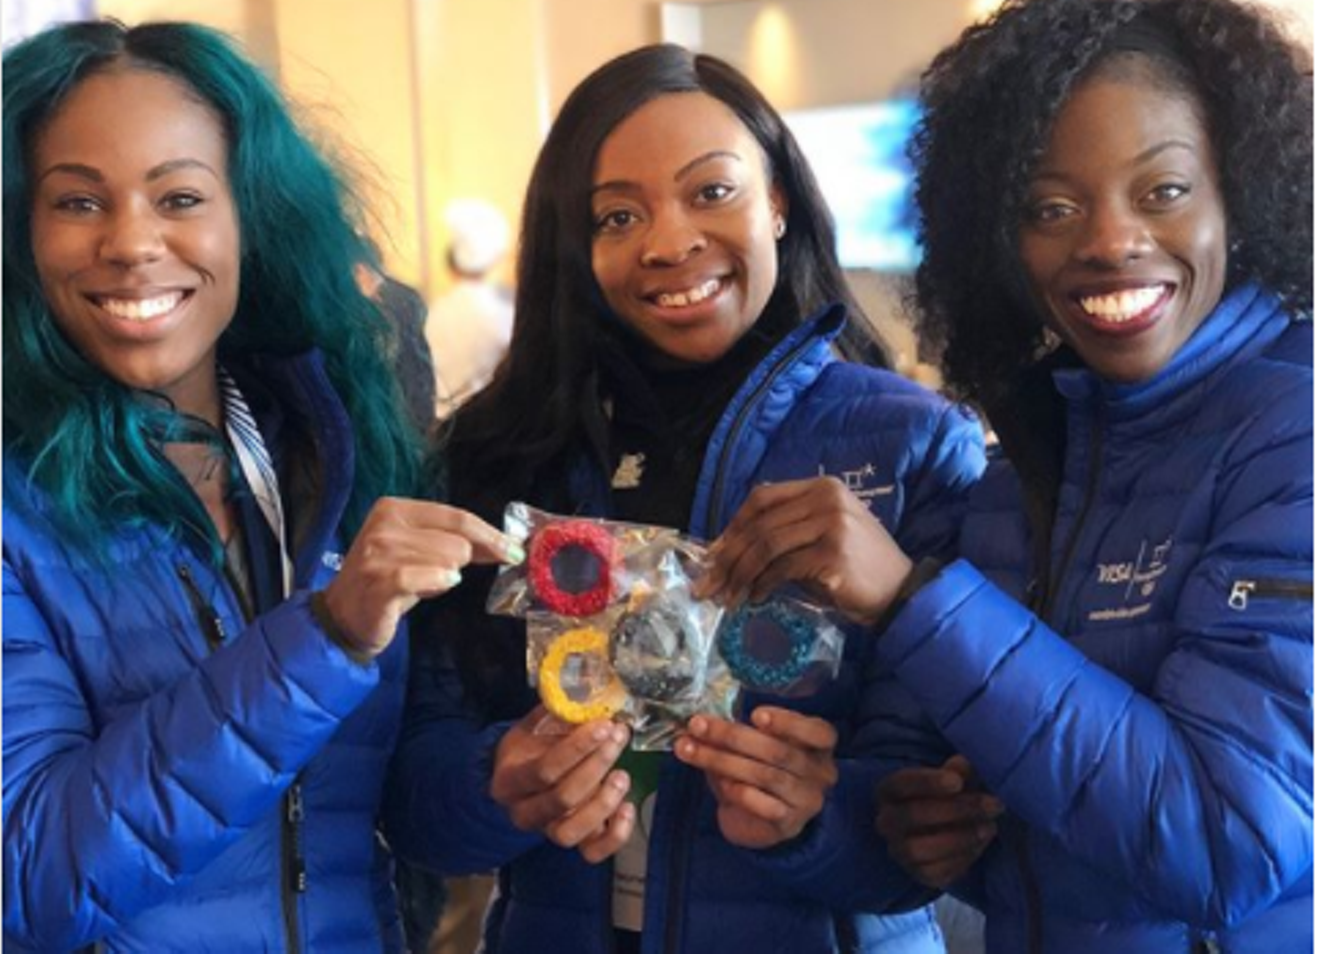 Nigeria's three Olympic bobsledders are (from left) Akuoma Omeoga, Ngozi Onwumere and Seun Adigun.